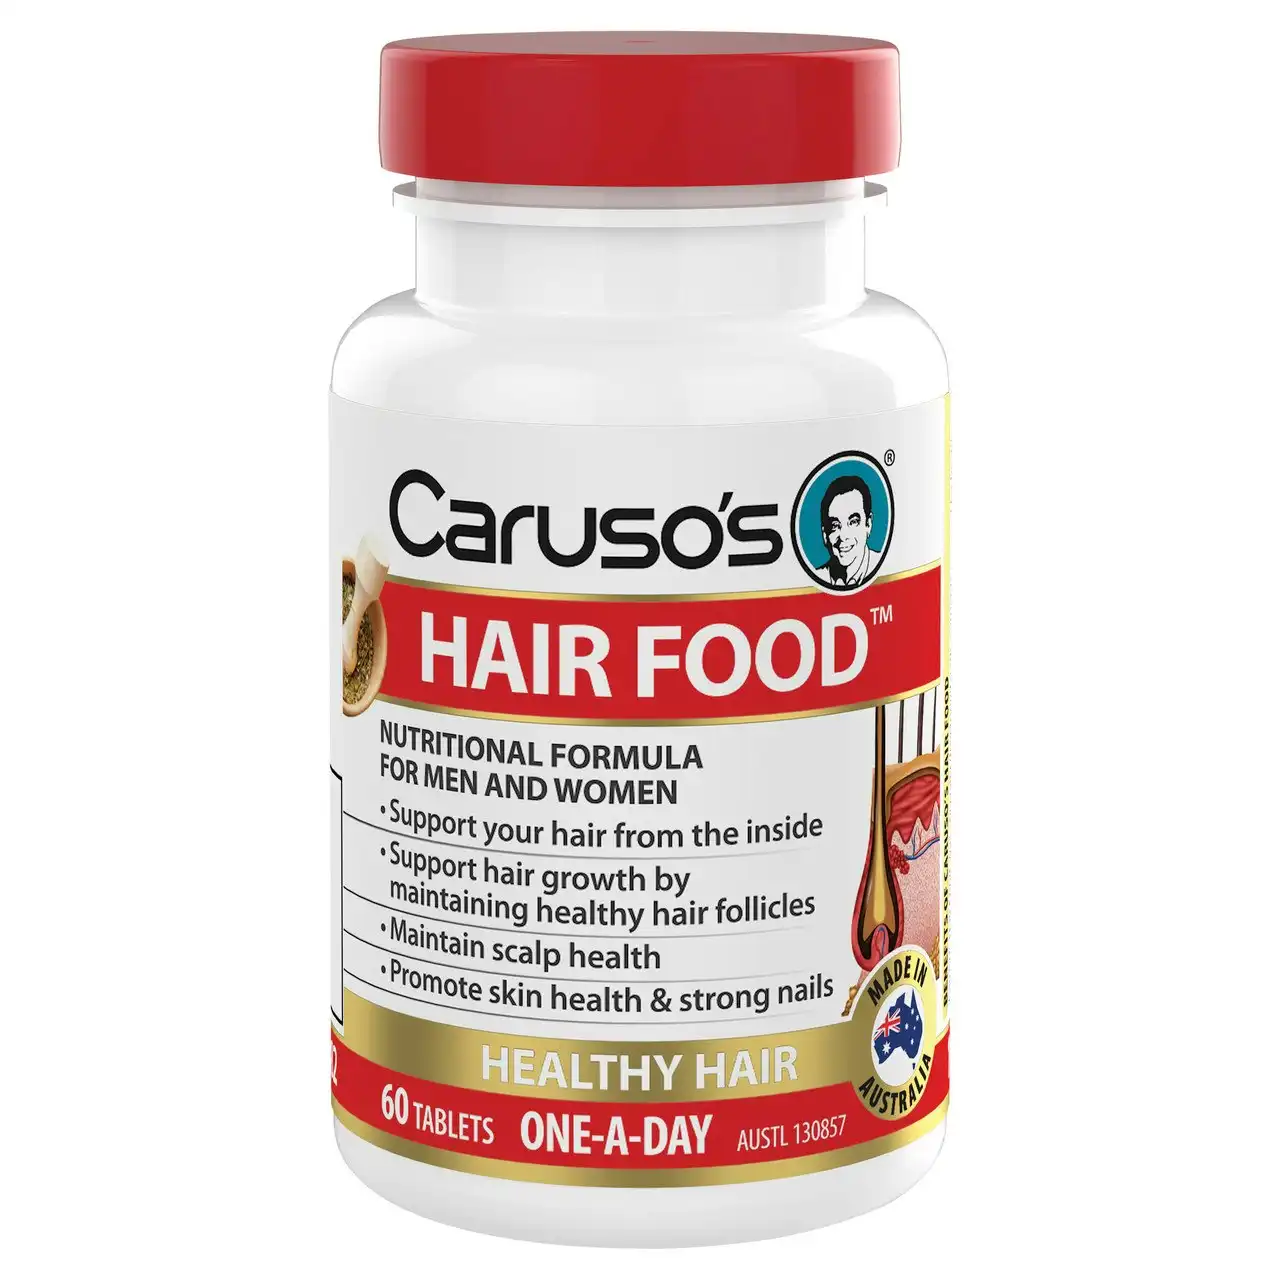 Caruso's Hair Food